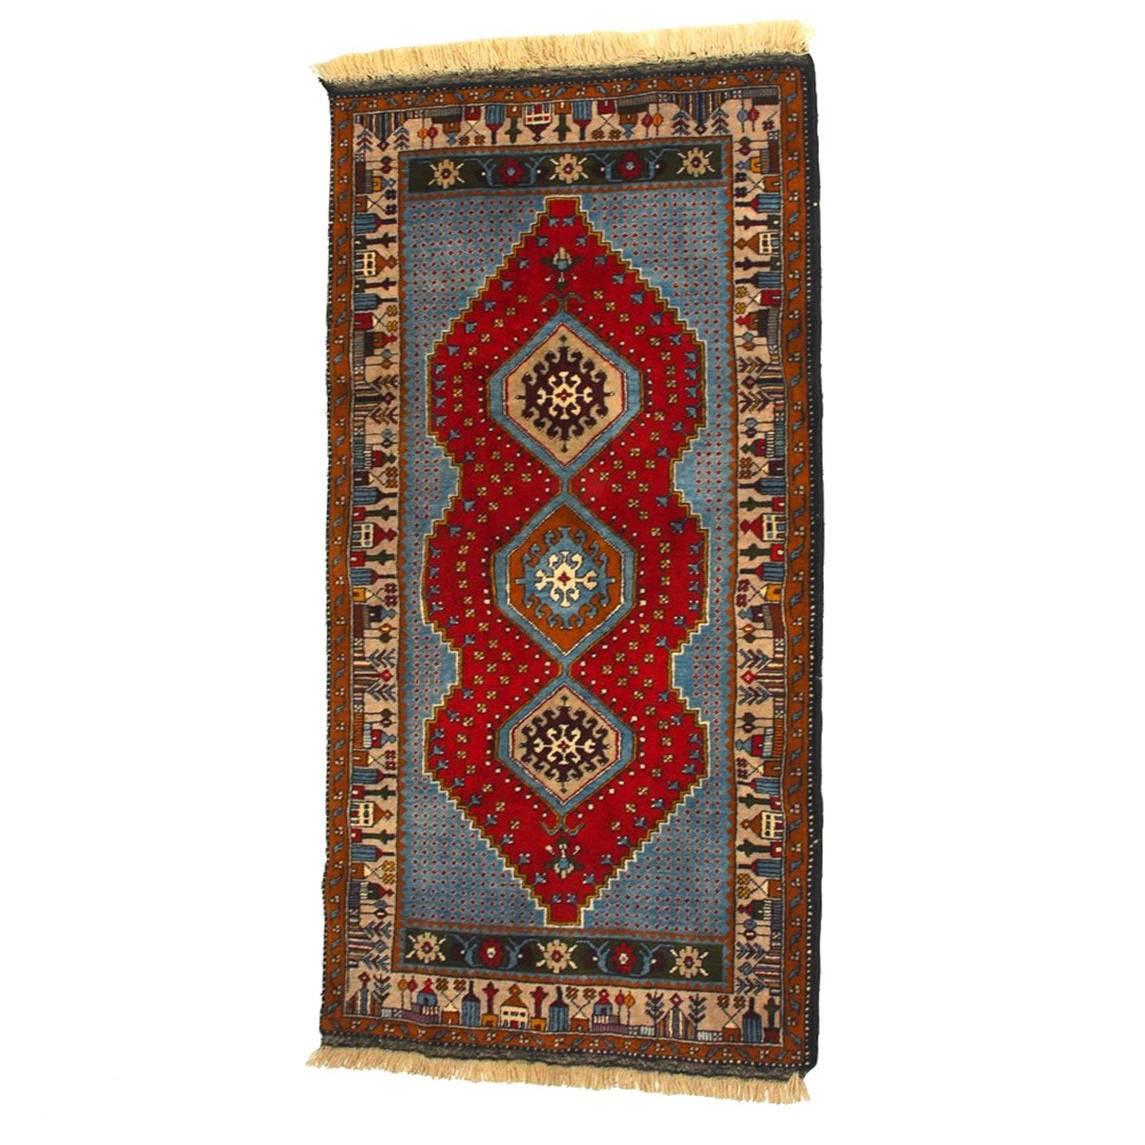 Fine vintage Turkish Yahyali rug or carpet featuring brilliant shades of blue over red. Centered by a triple hexagon pattern and an interesting border of village structures and trees. Yahyali carpets are known for their fine quality and attractive